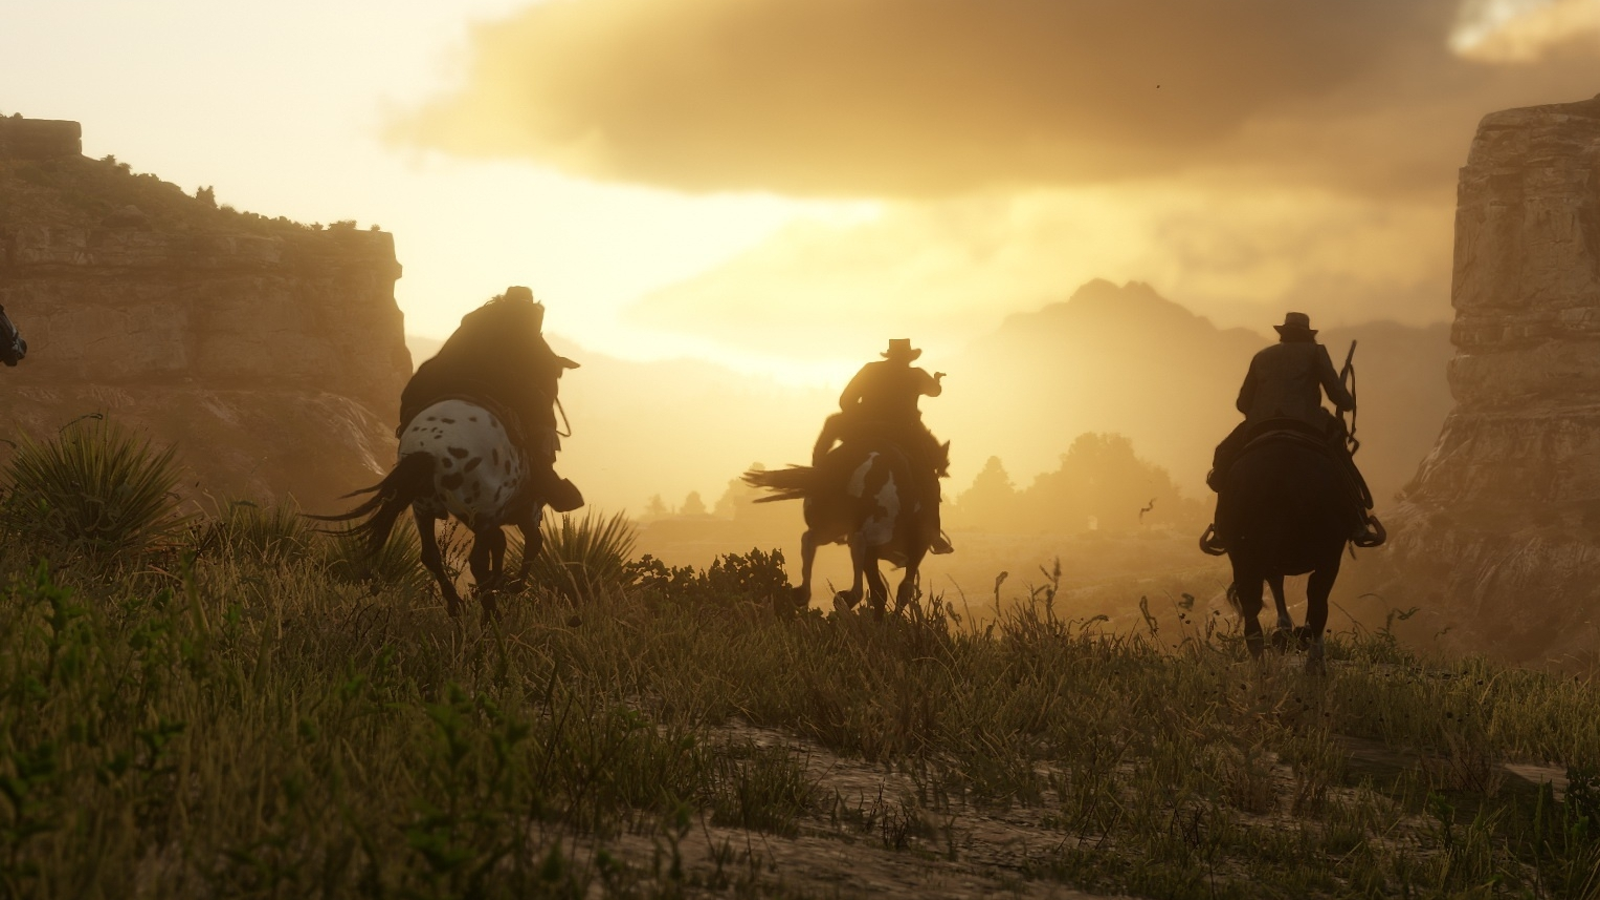 Red Dead Redemption 2: Story Mode and Ultimate Edition Content (UK